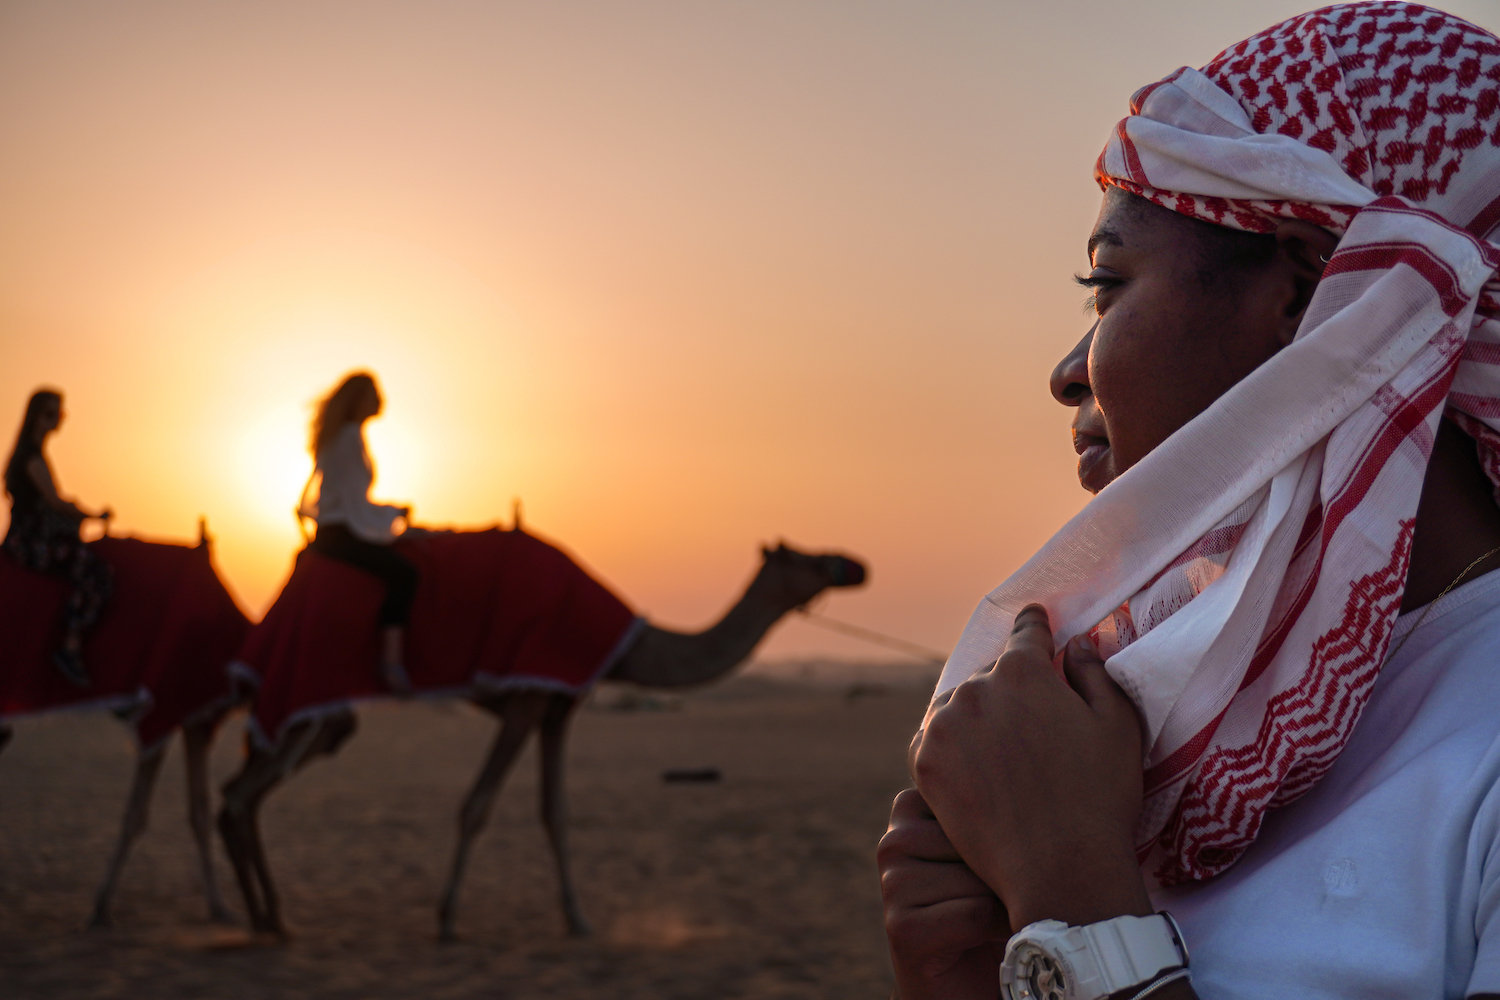 A girl looks at two camels walking past the sunset.